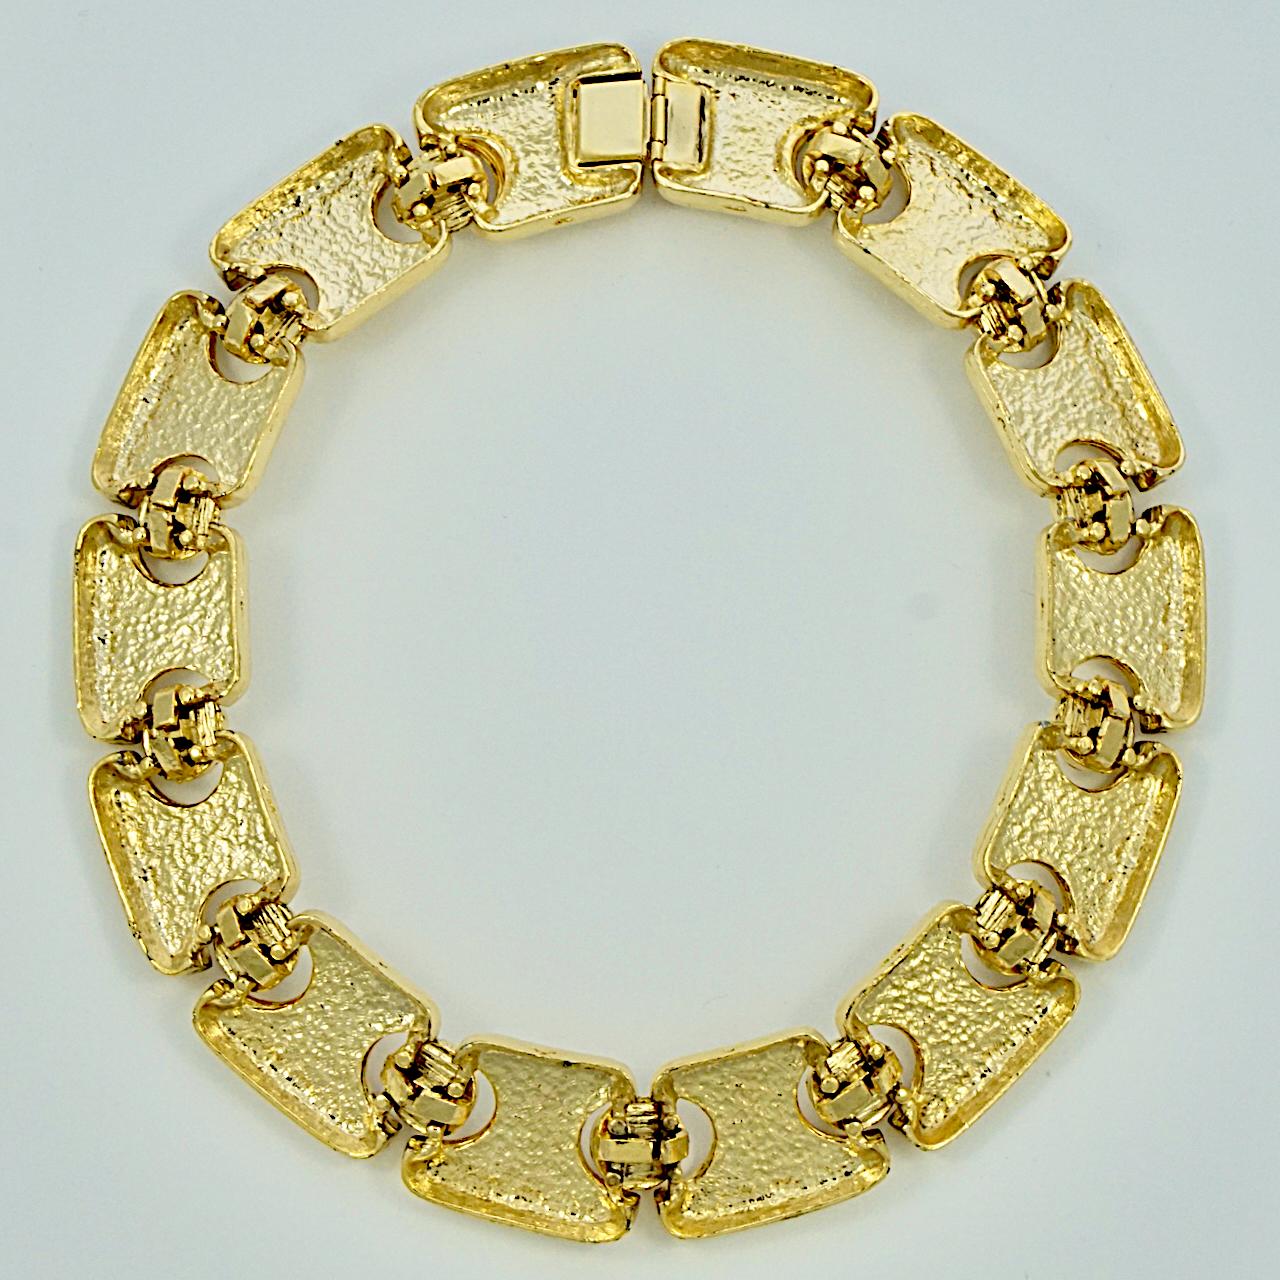 Gold Plated Textured Link Collar Necklace with Faux Pearls circa 1980s For Sale 2